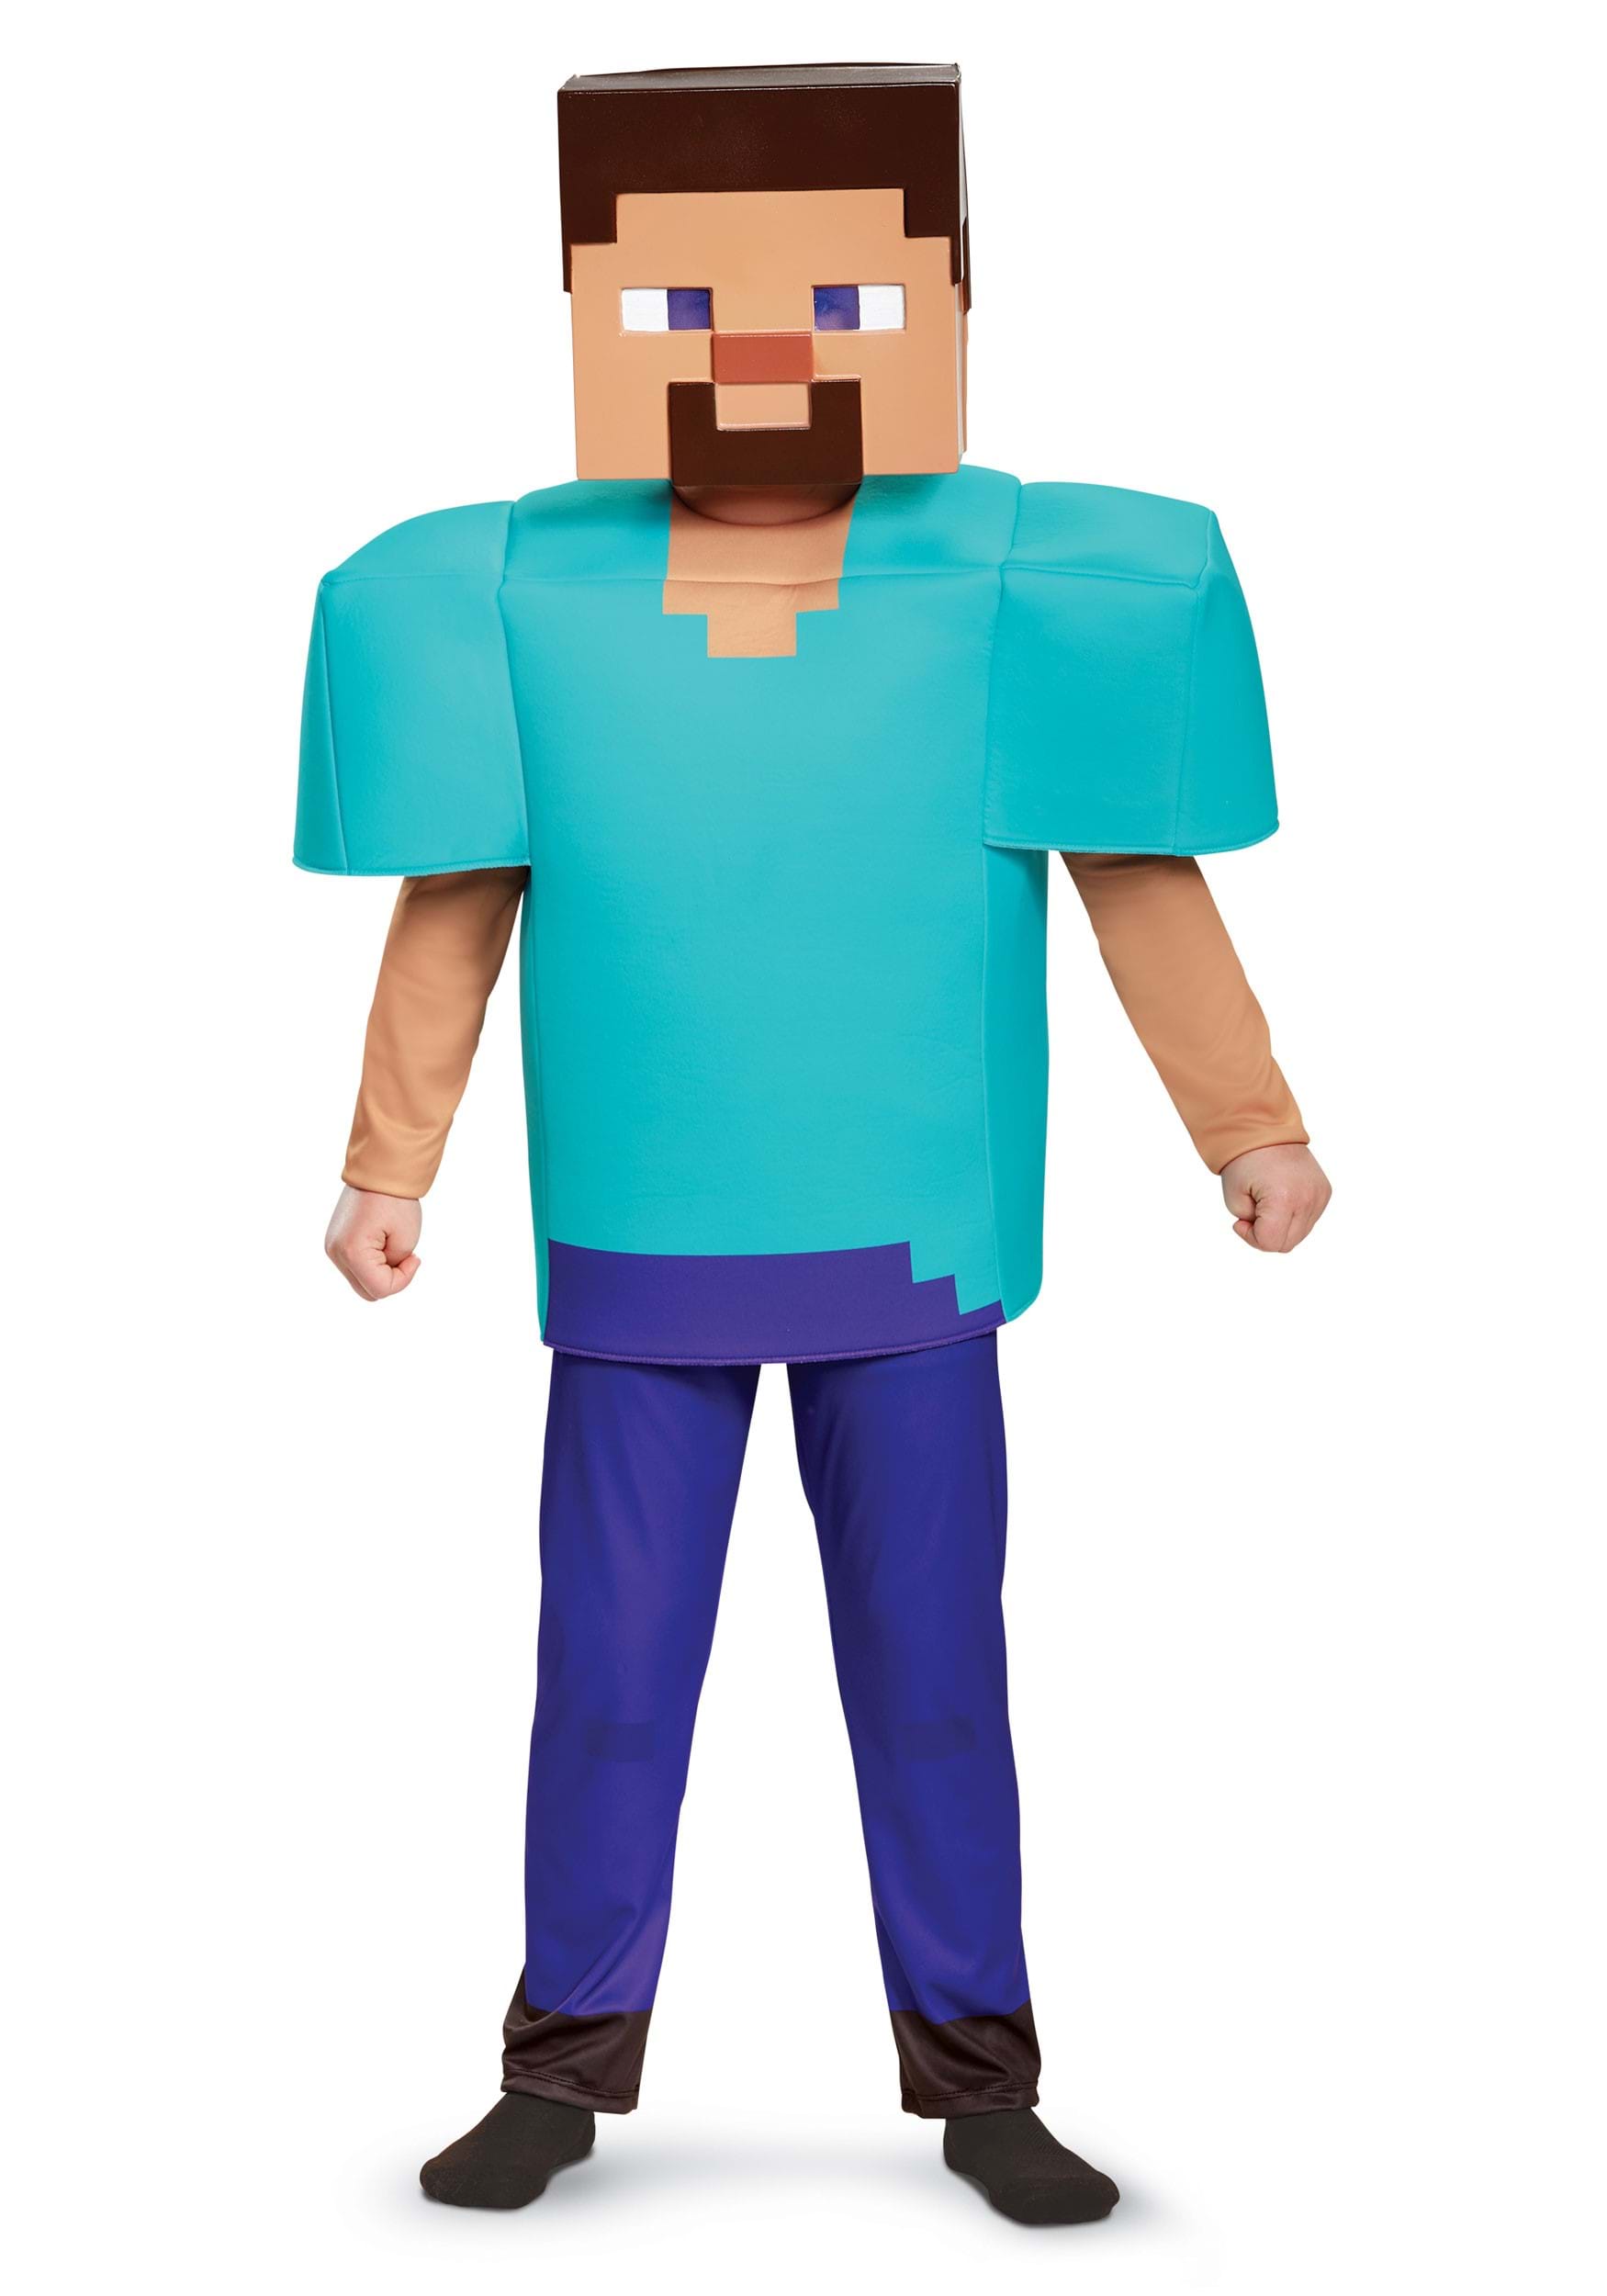 How Tall Is Steve From Minecraft?